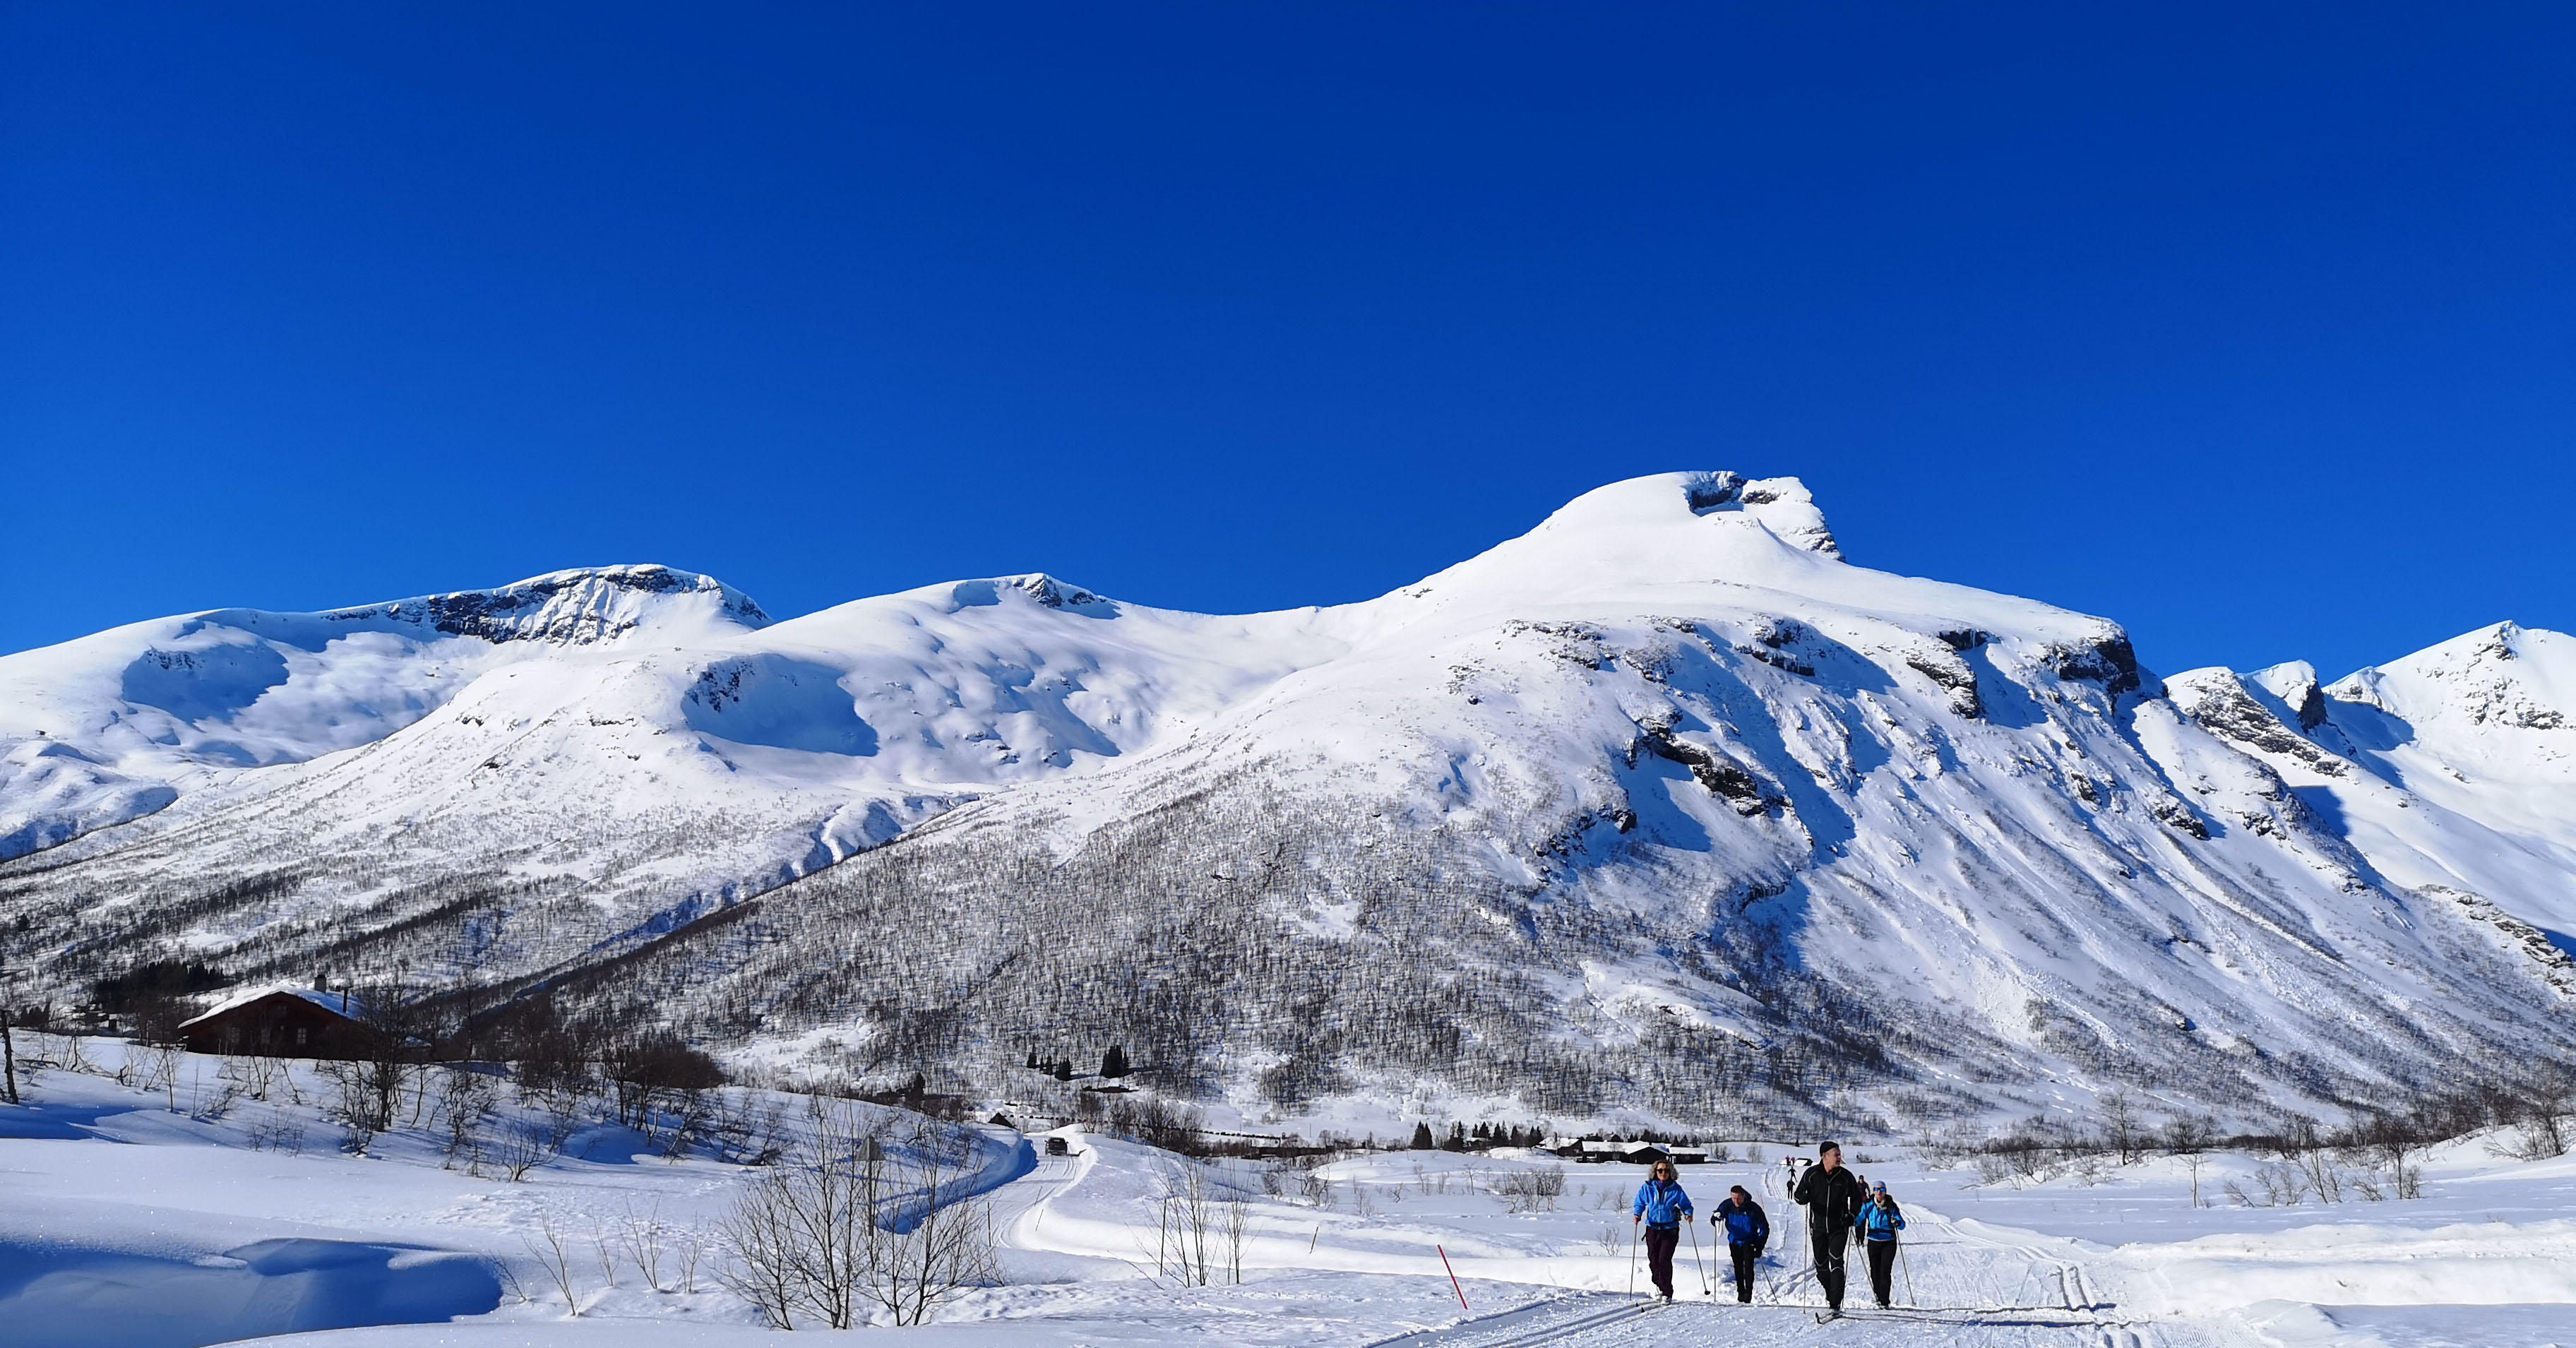 Fjord kommune offers great winter experiences both on and off groomed slopes and slopes!